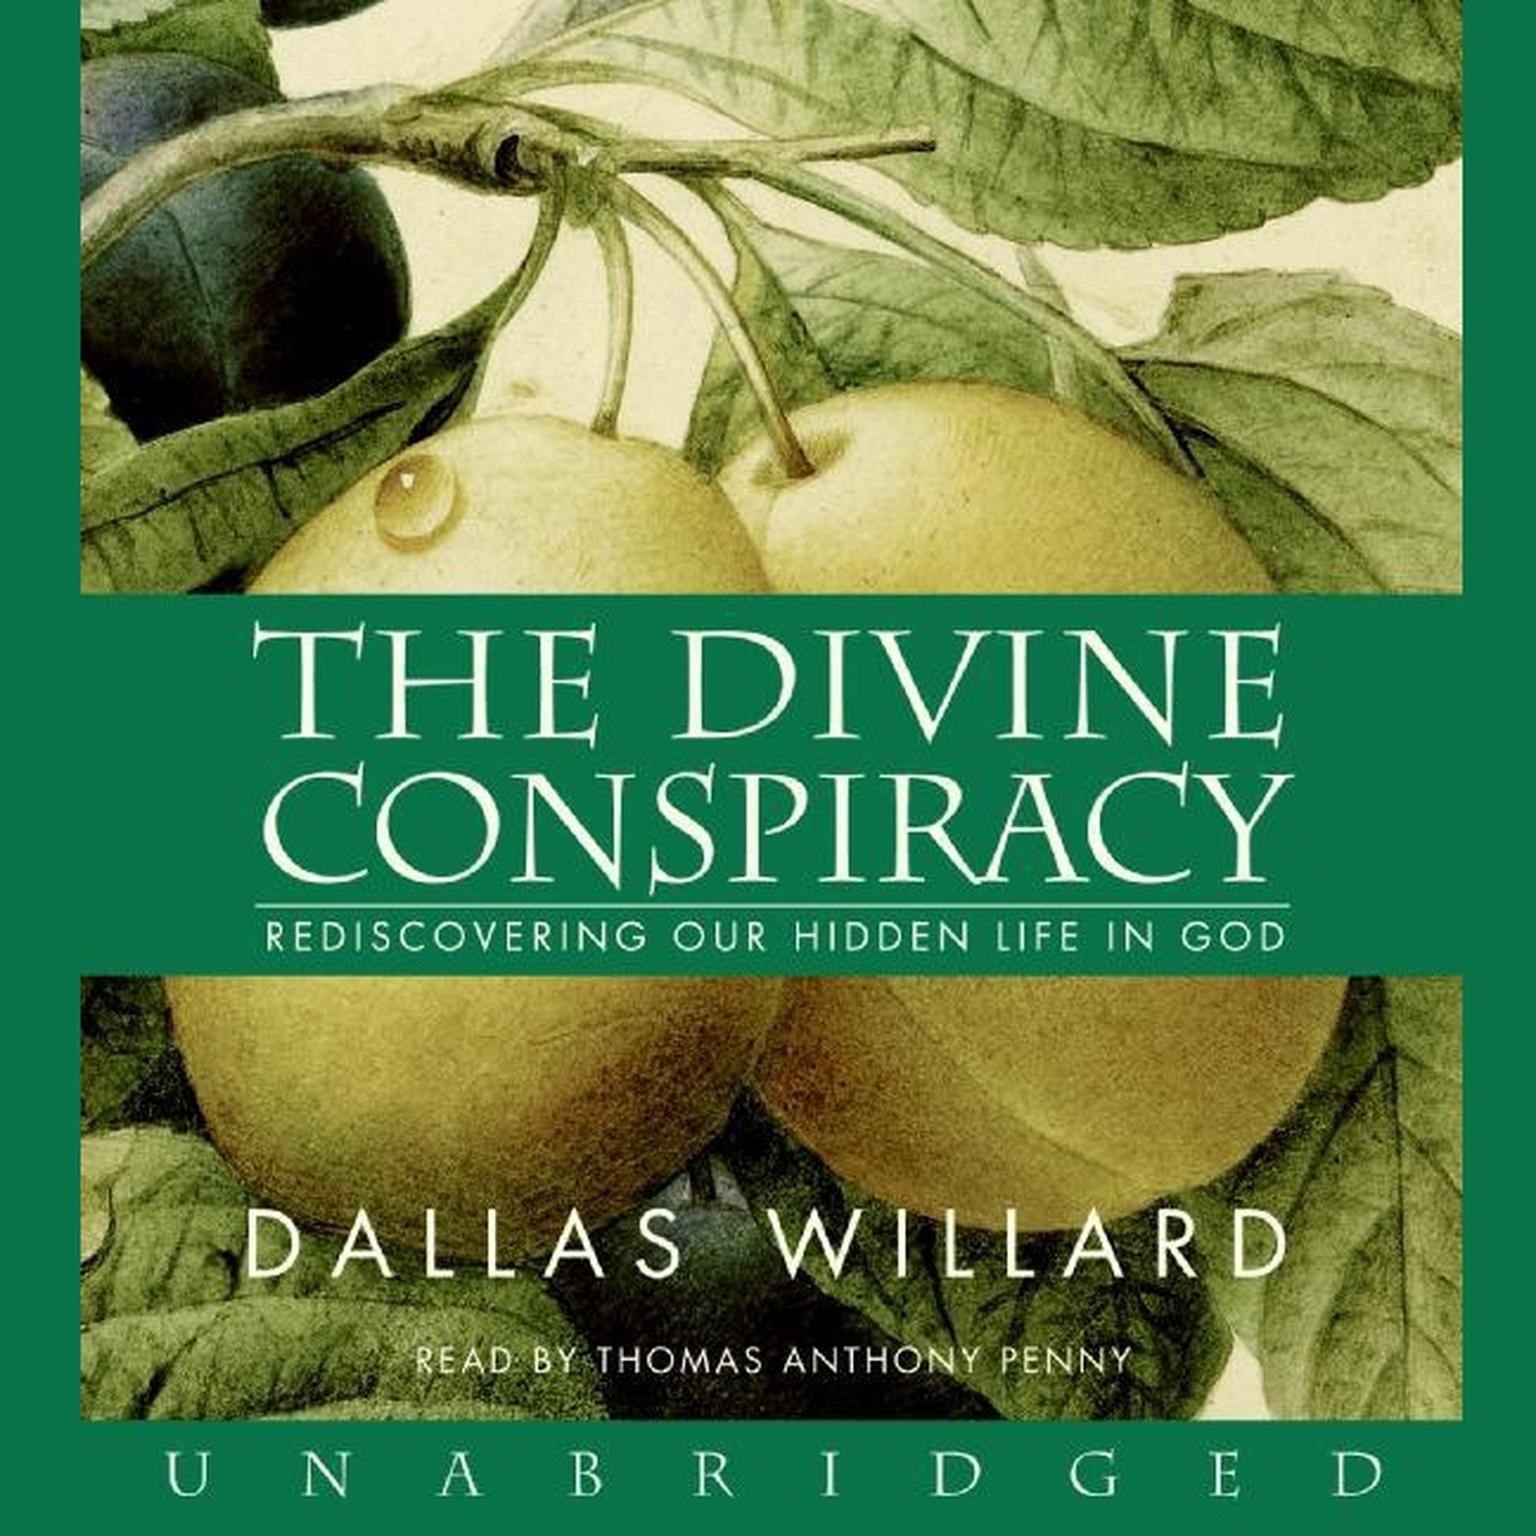 The Divine Conspiracy: Rediscovering Our Hidden Life in God Audiobook, by Dallas Willard